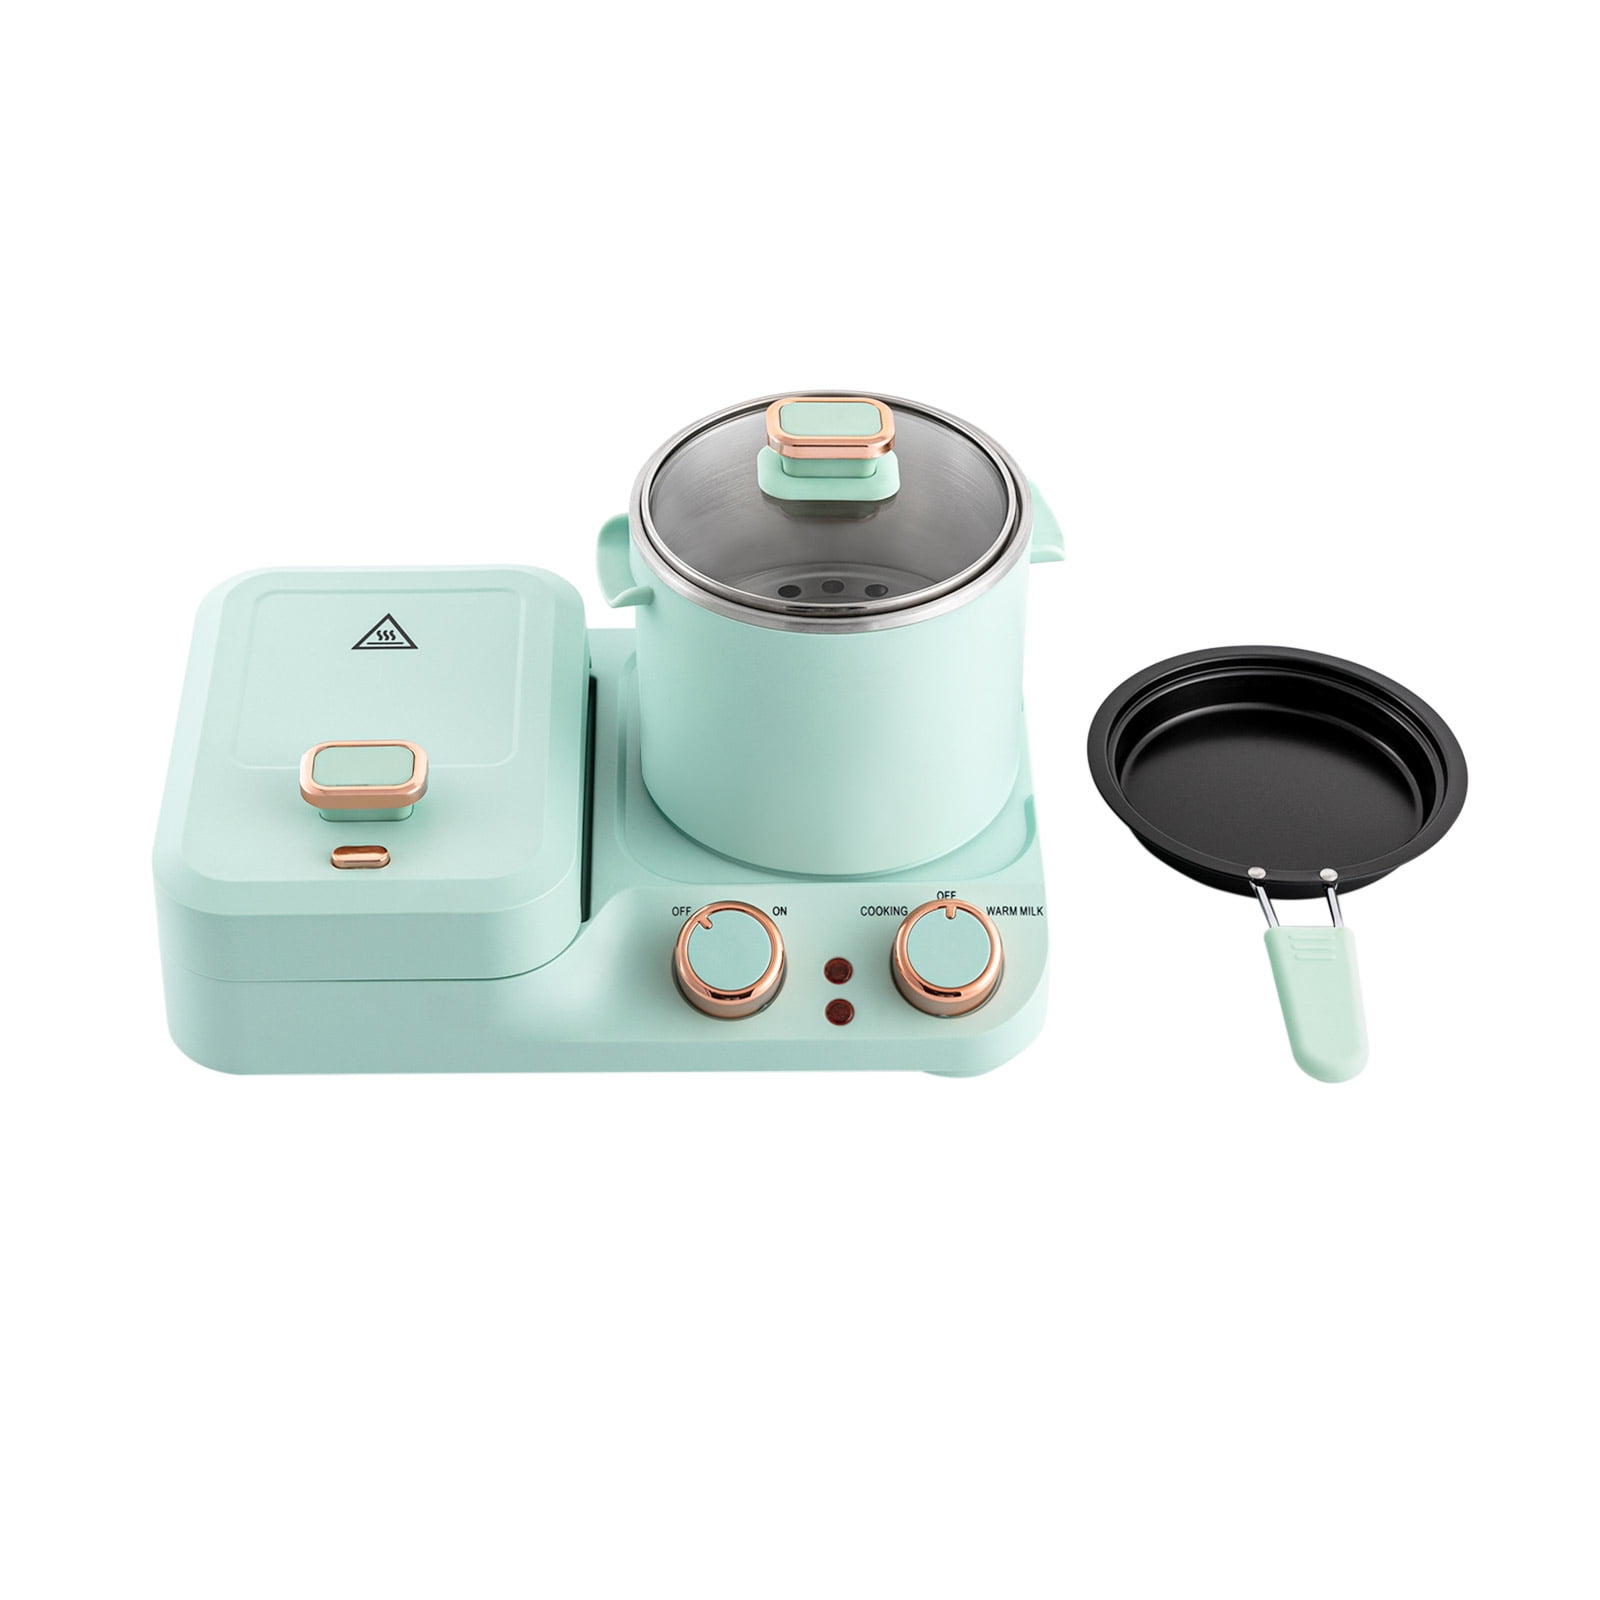 This 3-in-1 breakfast maker is perfect for small kitchens and